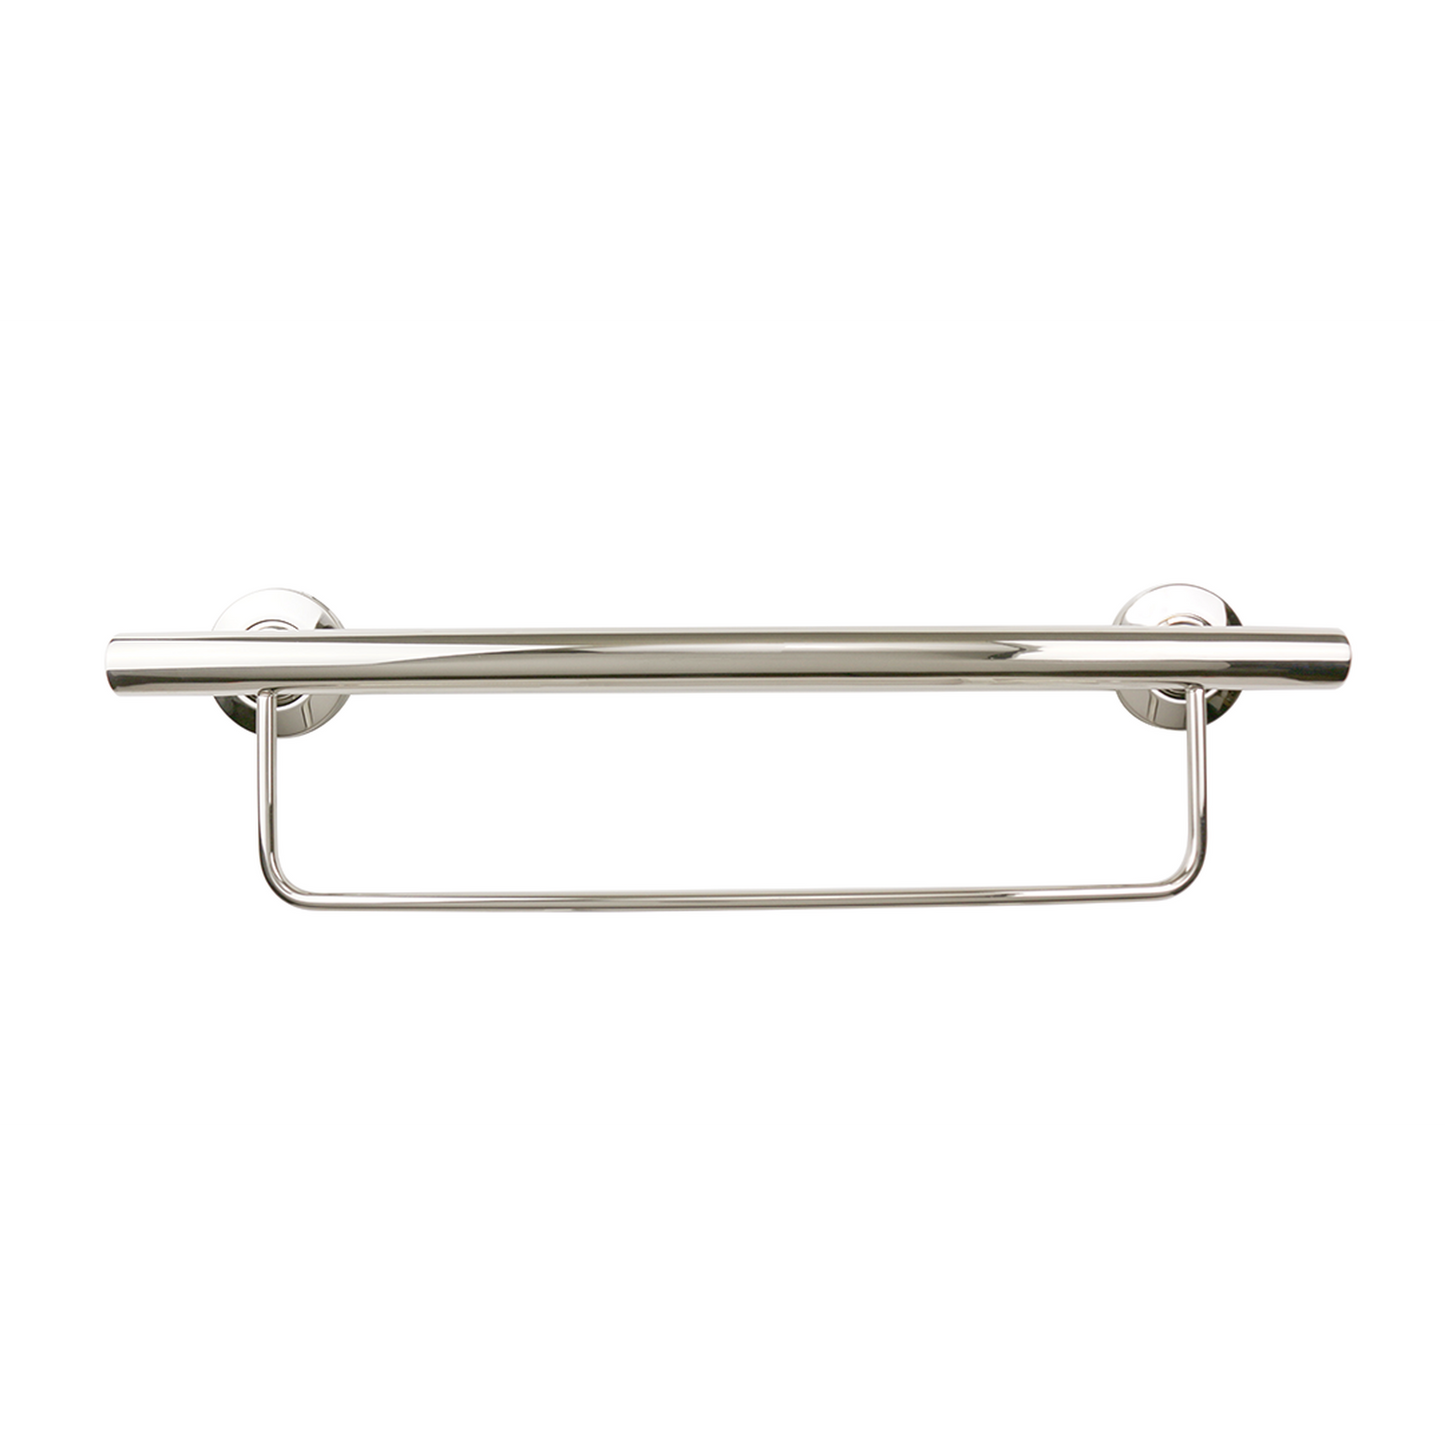 Seachrome Lifestyle & Wellness Series 24" Polished Stainless Steel 1.25 Diameter Concealed Flange Newport Grab Bar With Towel Bar